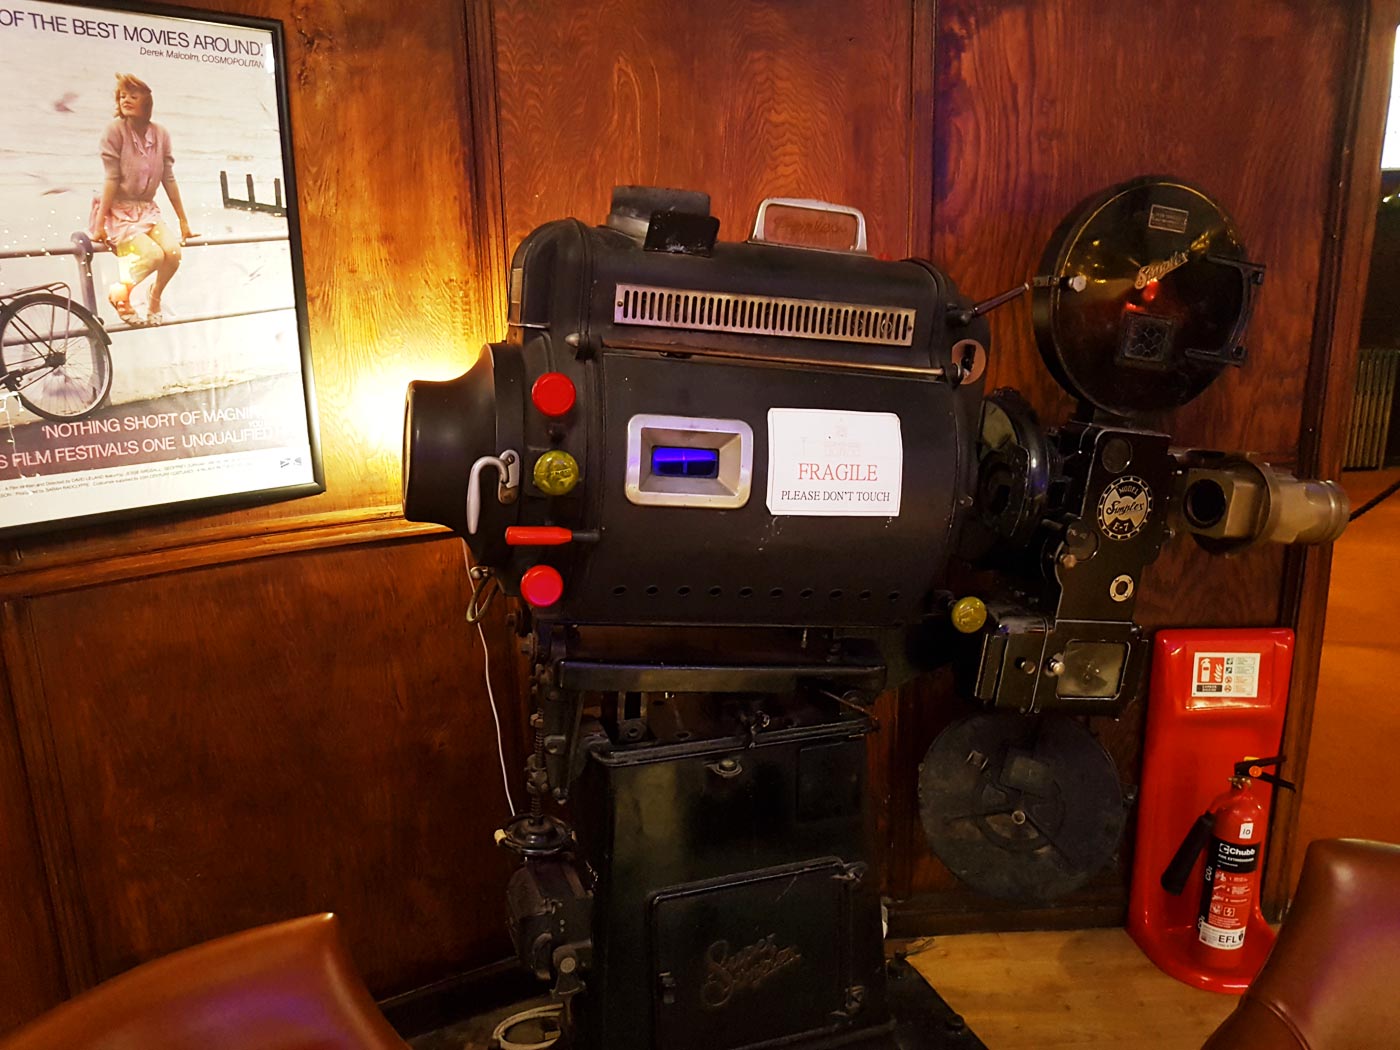 Old film projector in The Dome Cinema